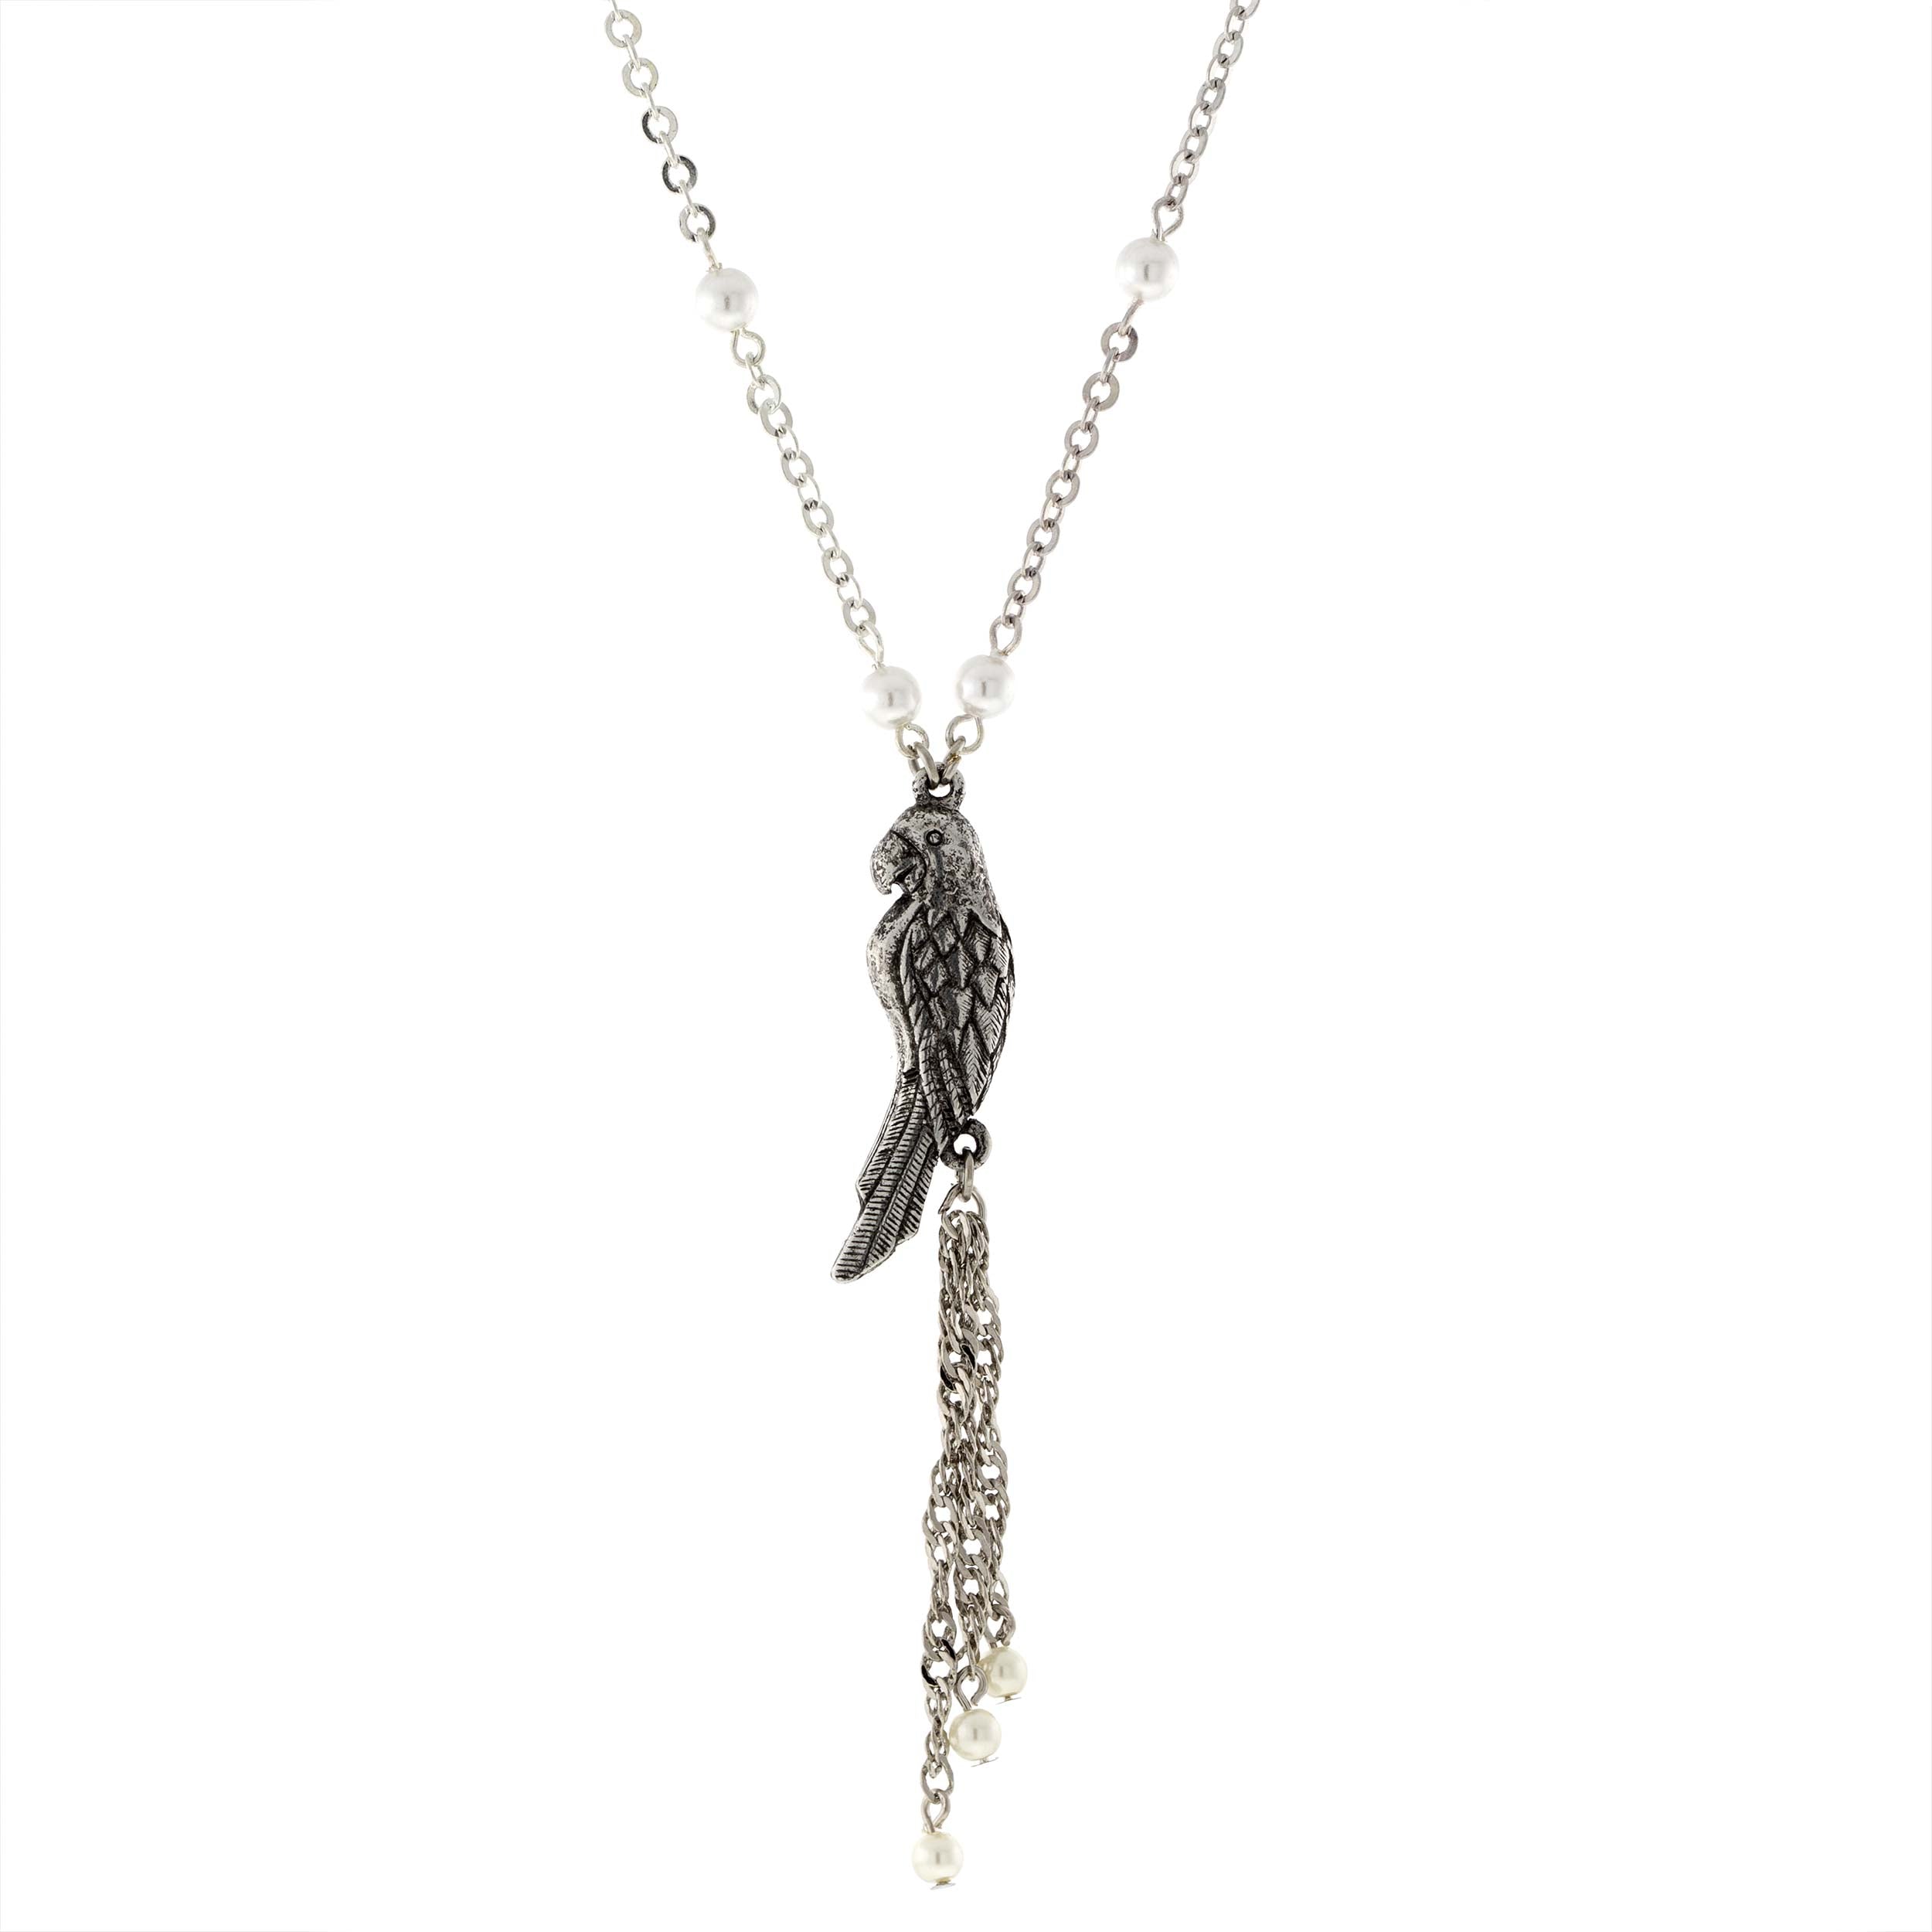 Pewter Parrot With Silver Tone Pearl Chain And Tassel Necklace 16 Adj.